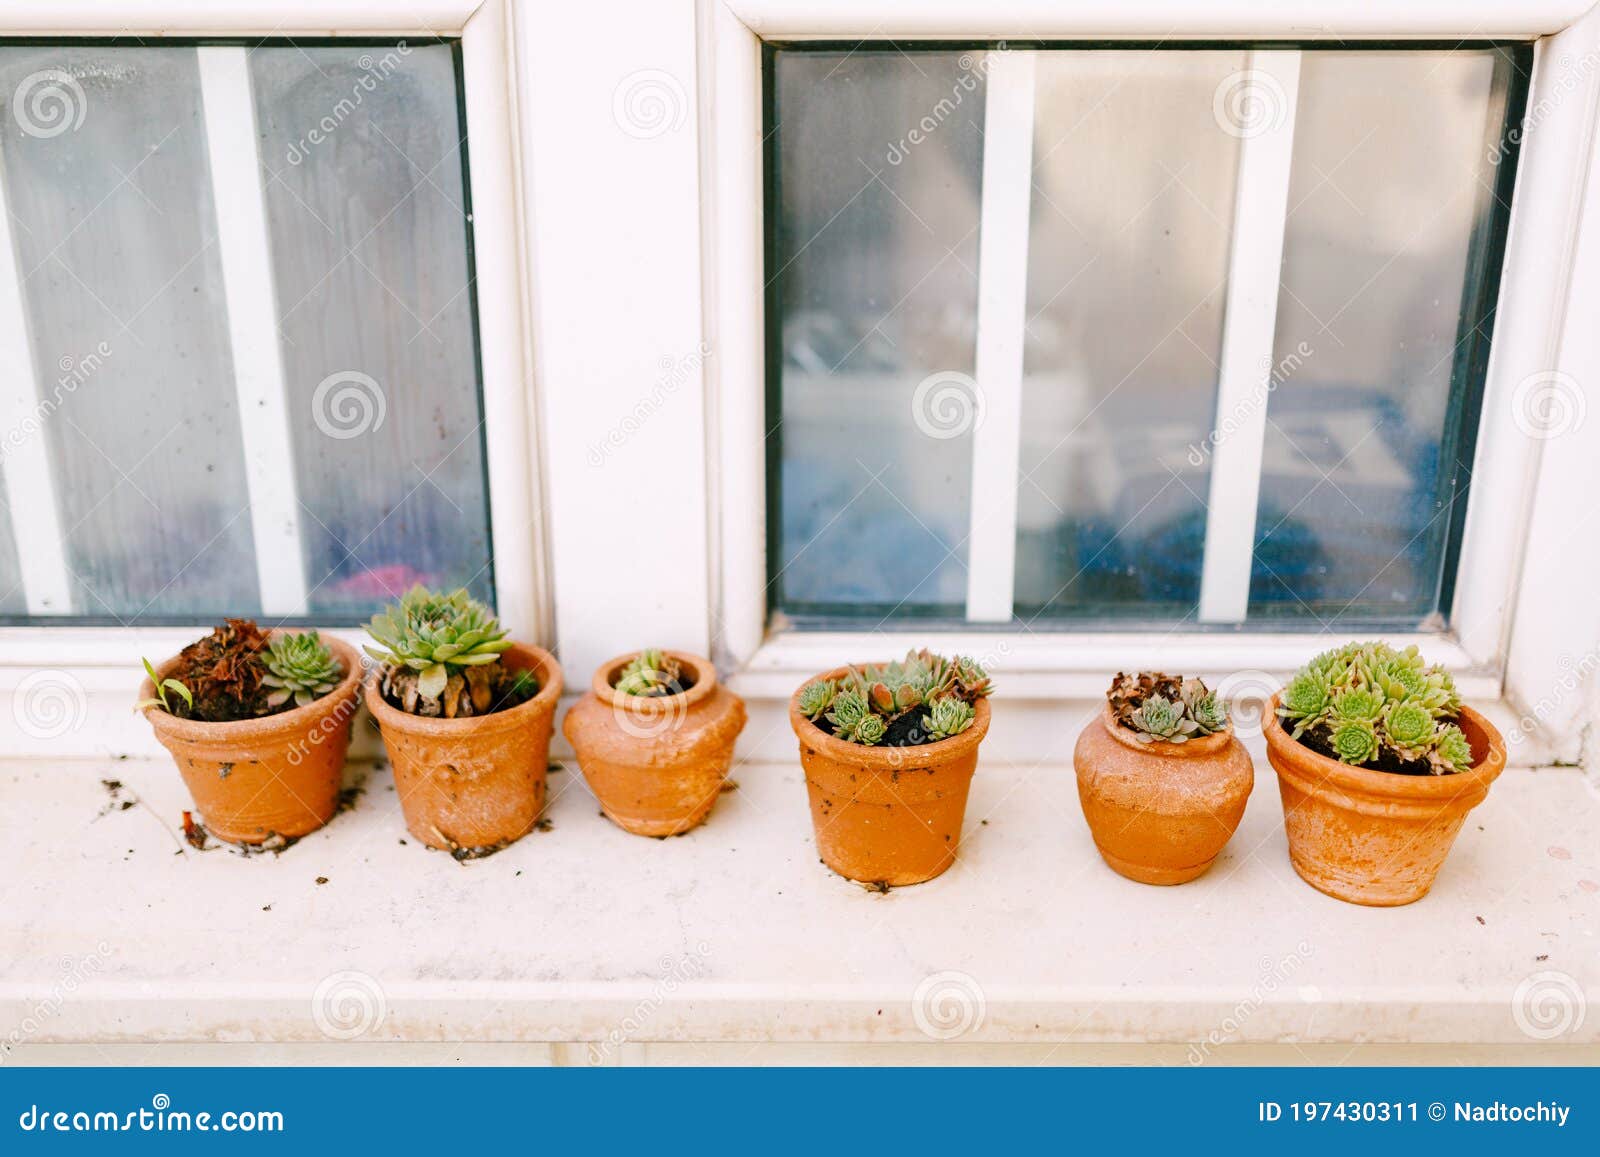 Clay Pots with Succulents on the Windowsill. Stock Image - Image of ...